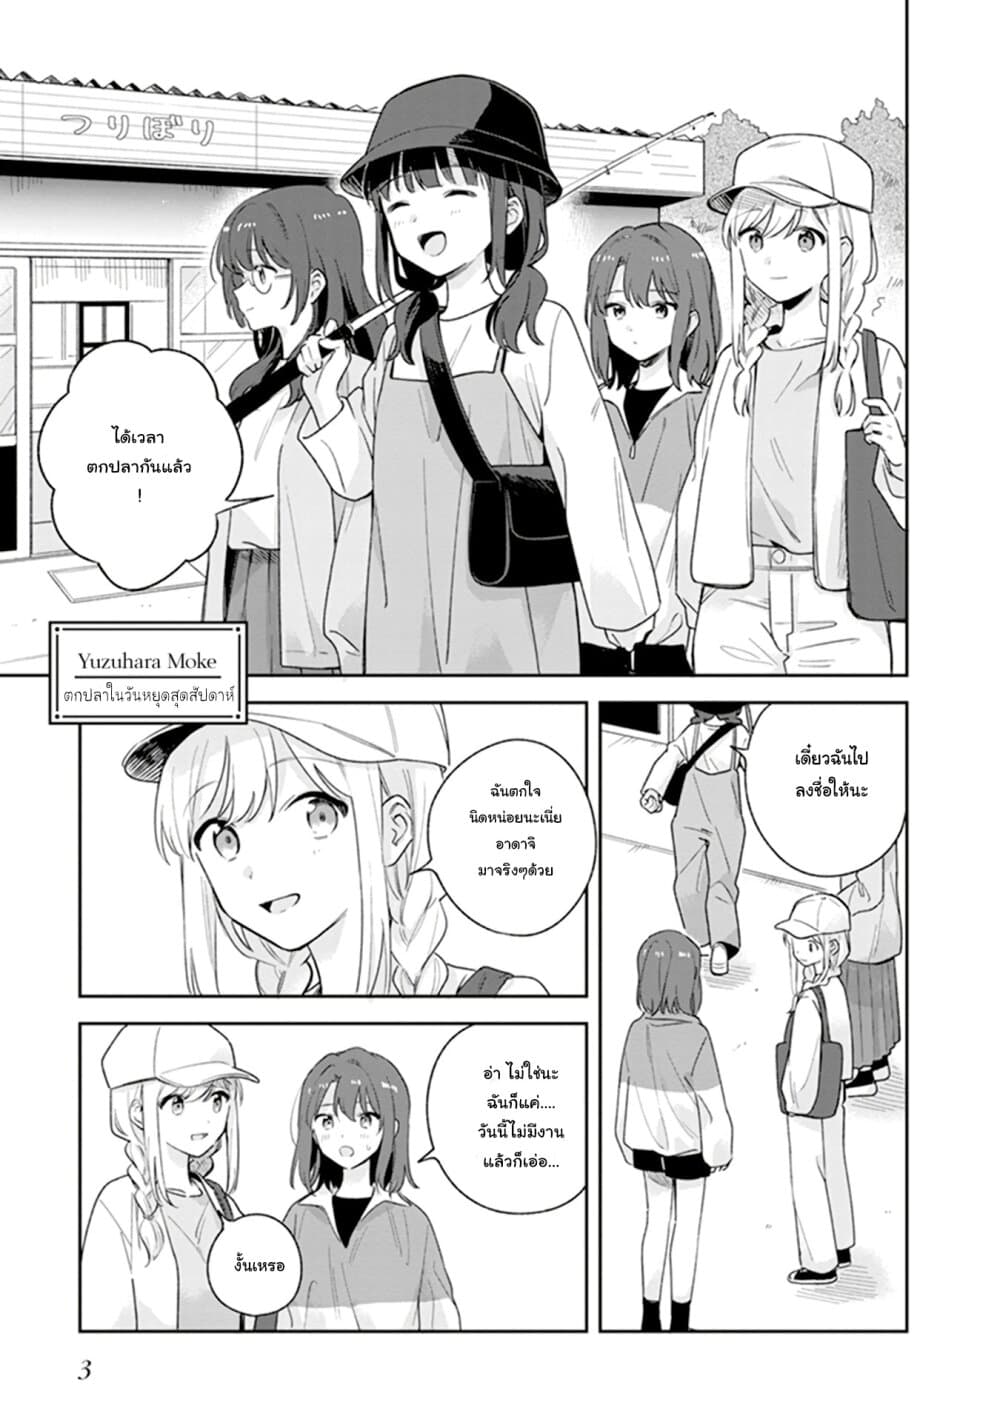 Adachi-to-Shimamura-Official-Comic-Anthology-Chapter1-5.jpg